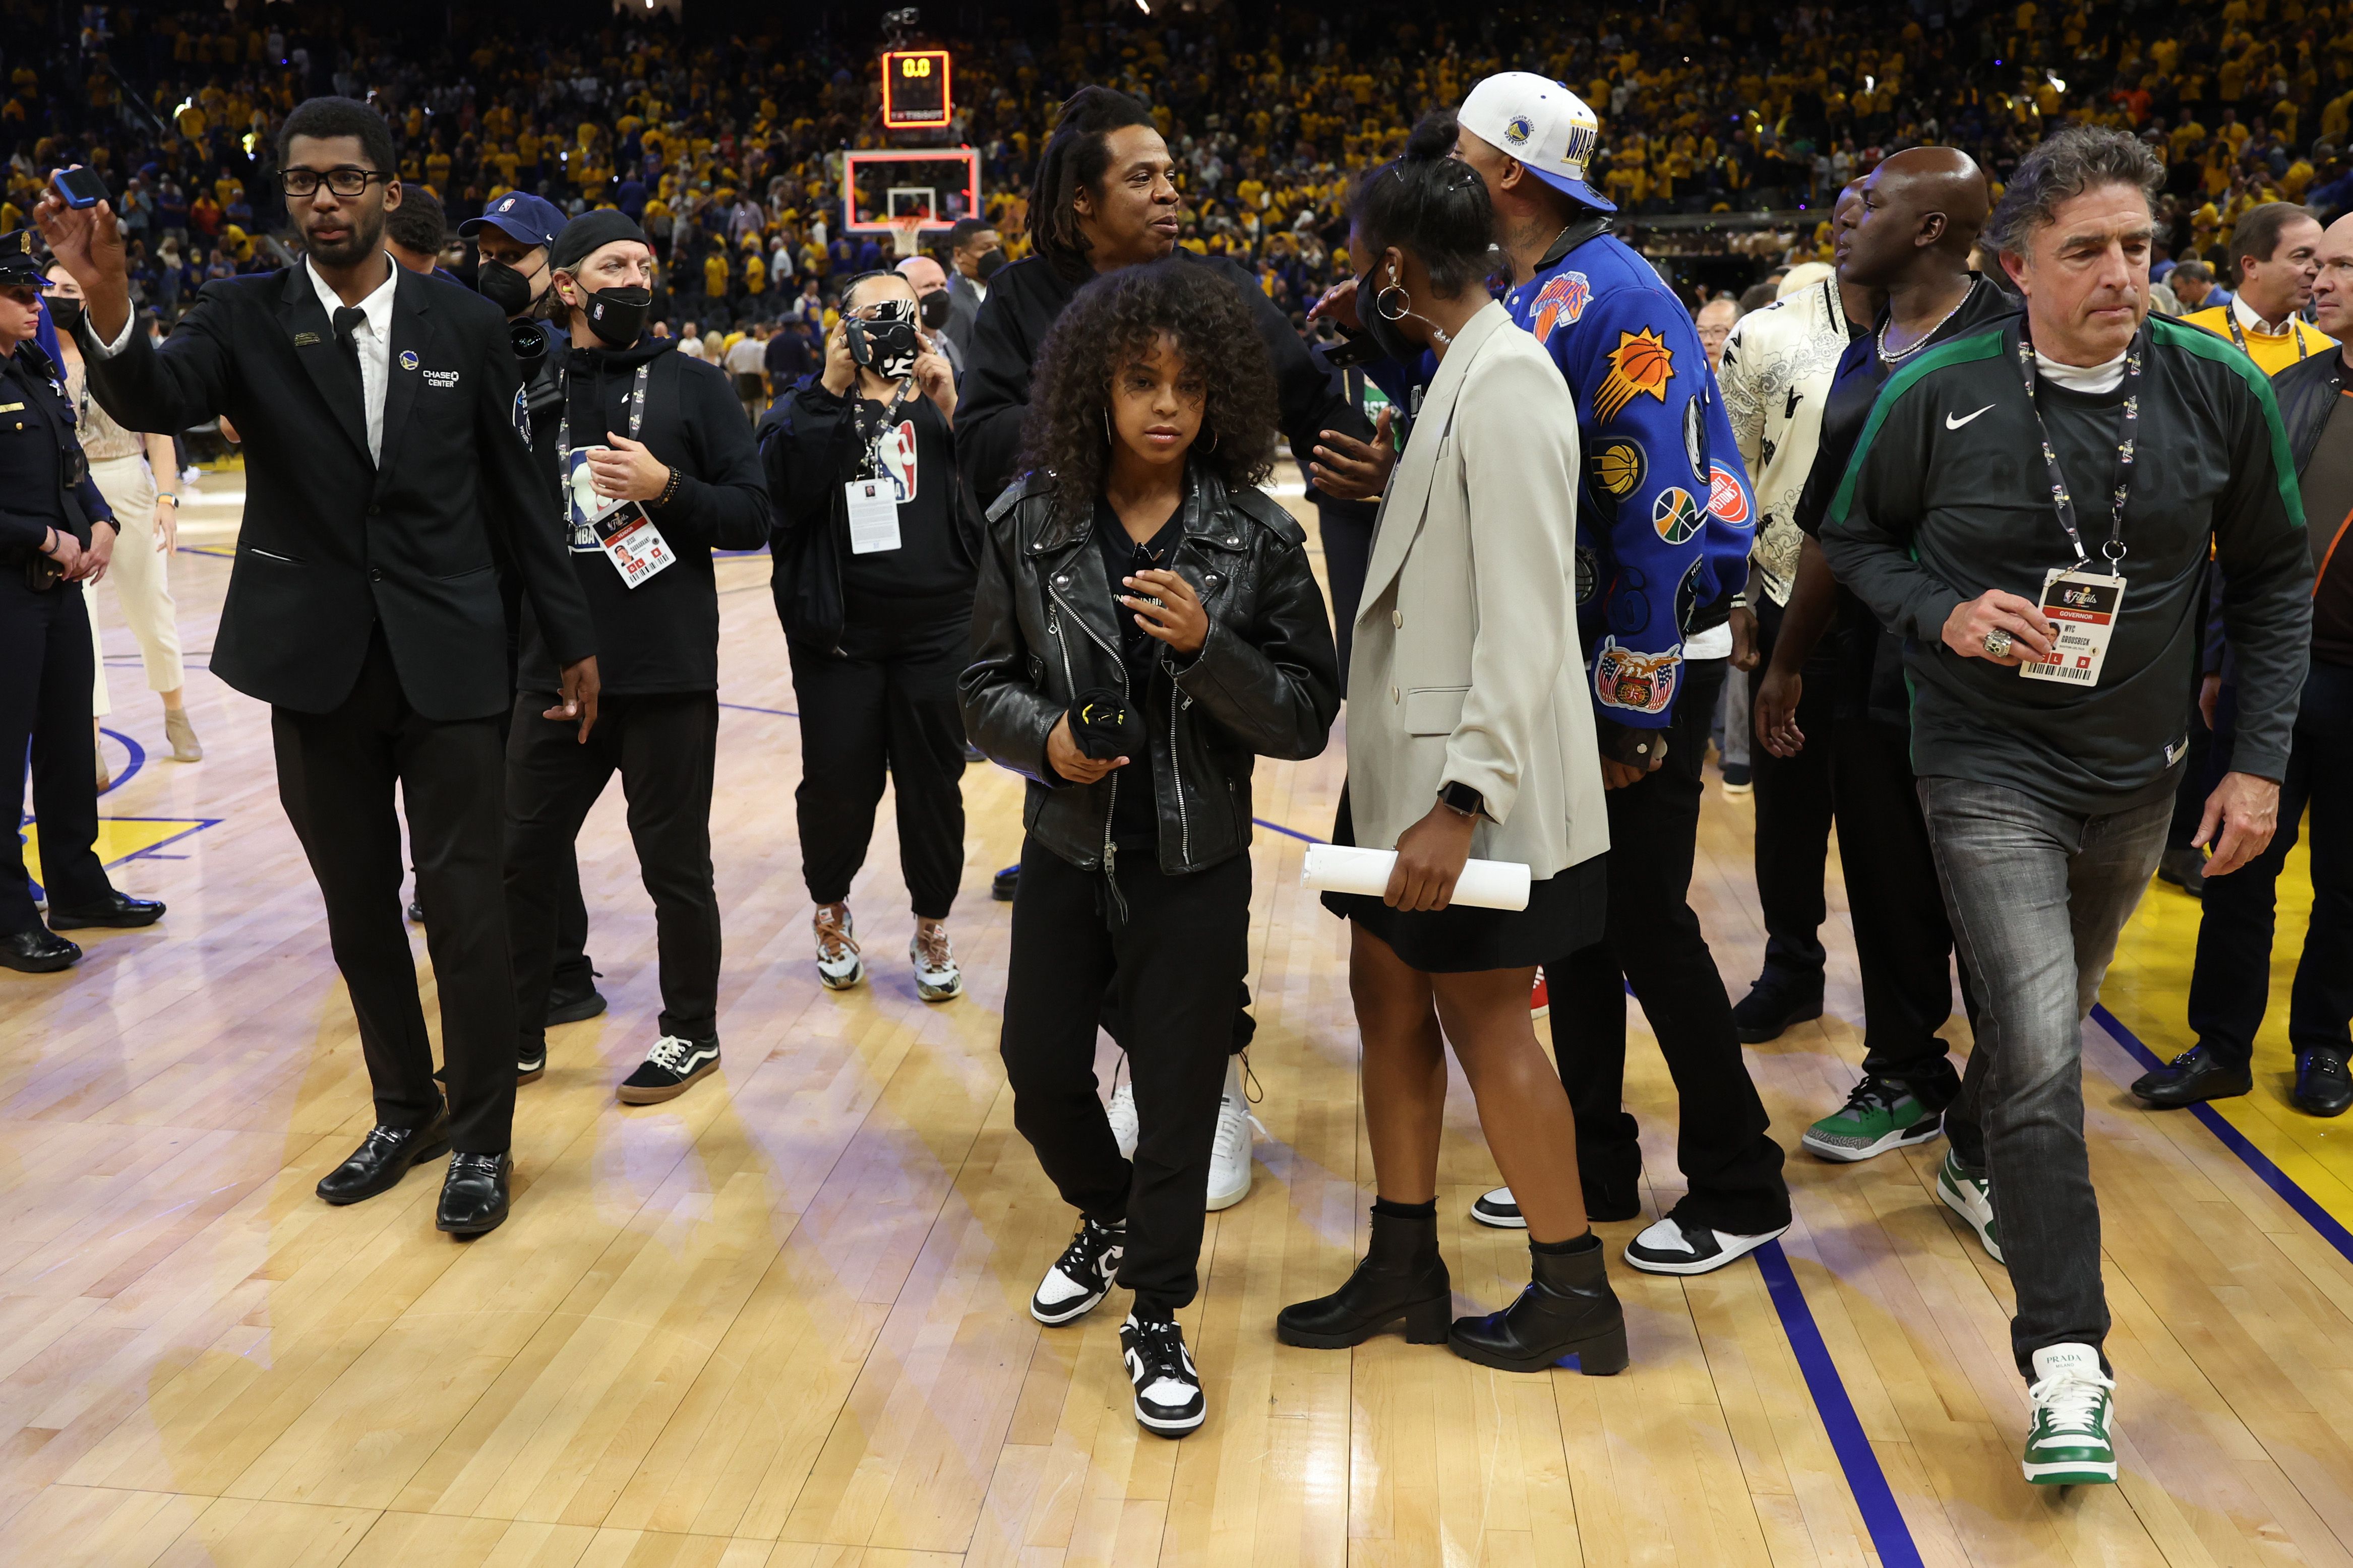 Beyoncé's Daughter Blue Ivy Carter Attends NBA Game With Jay Z